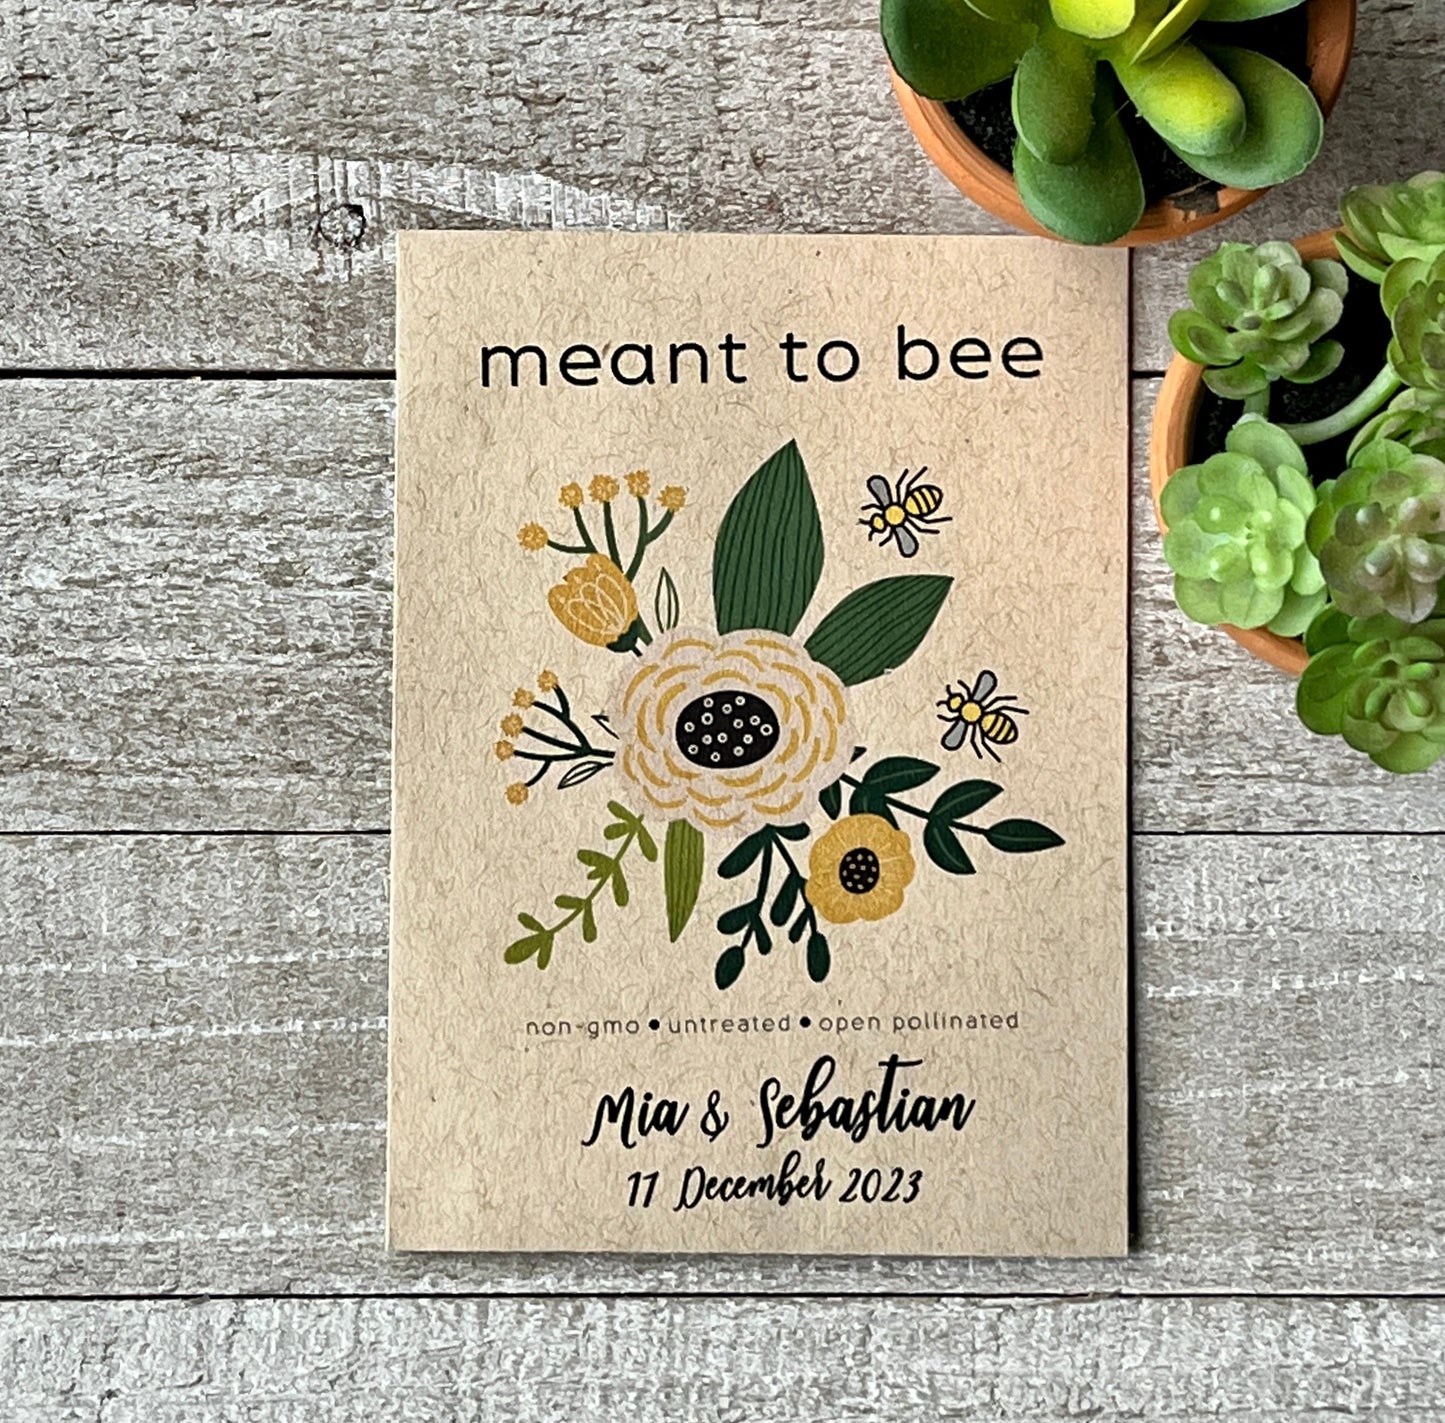 Meant To Bee Wildflower Seed Packet